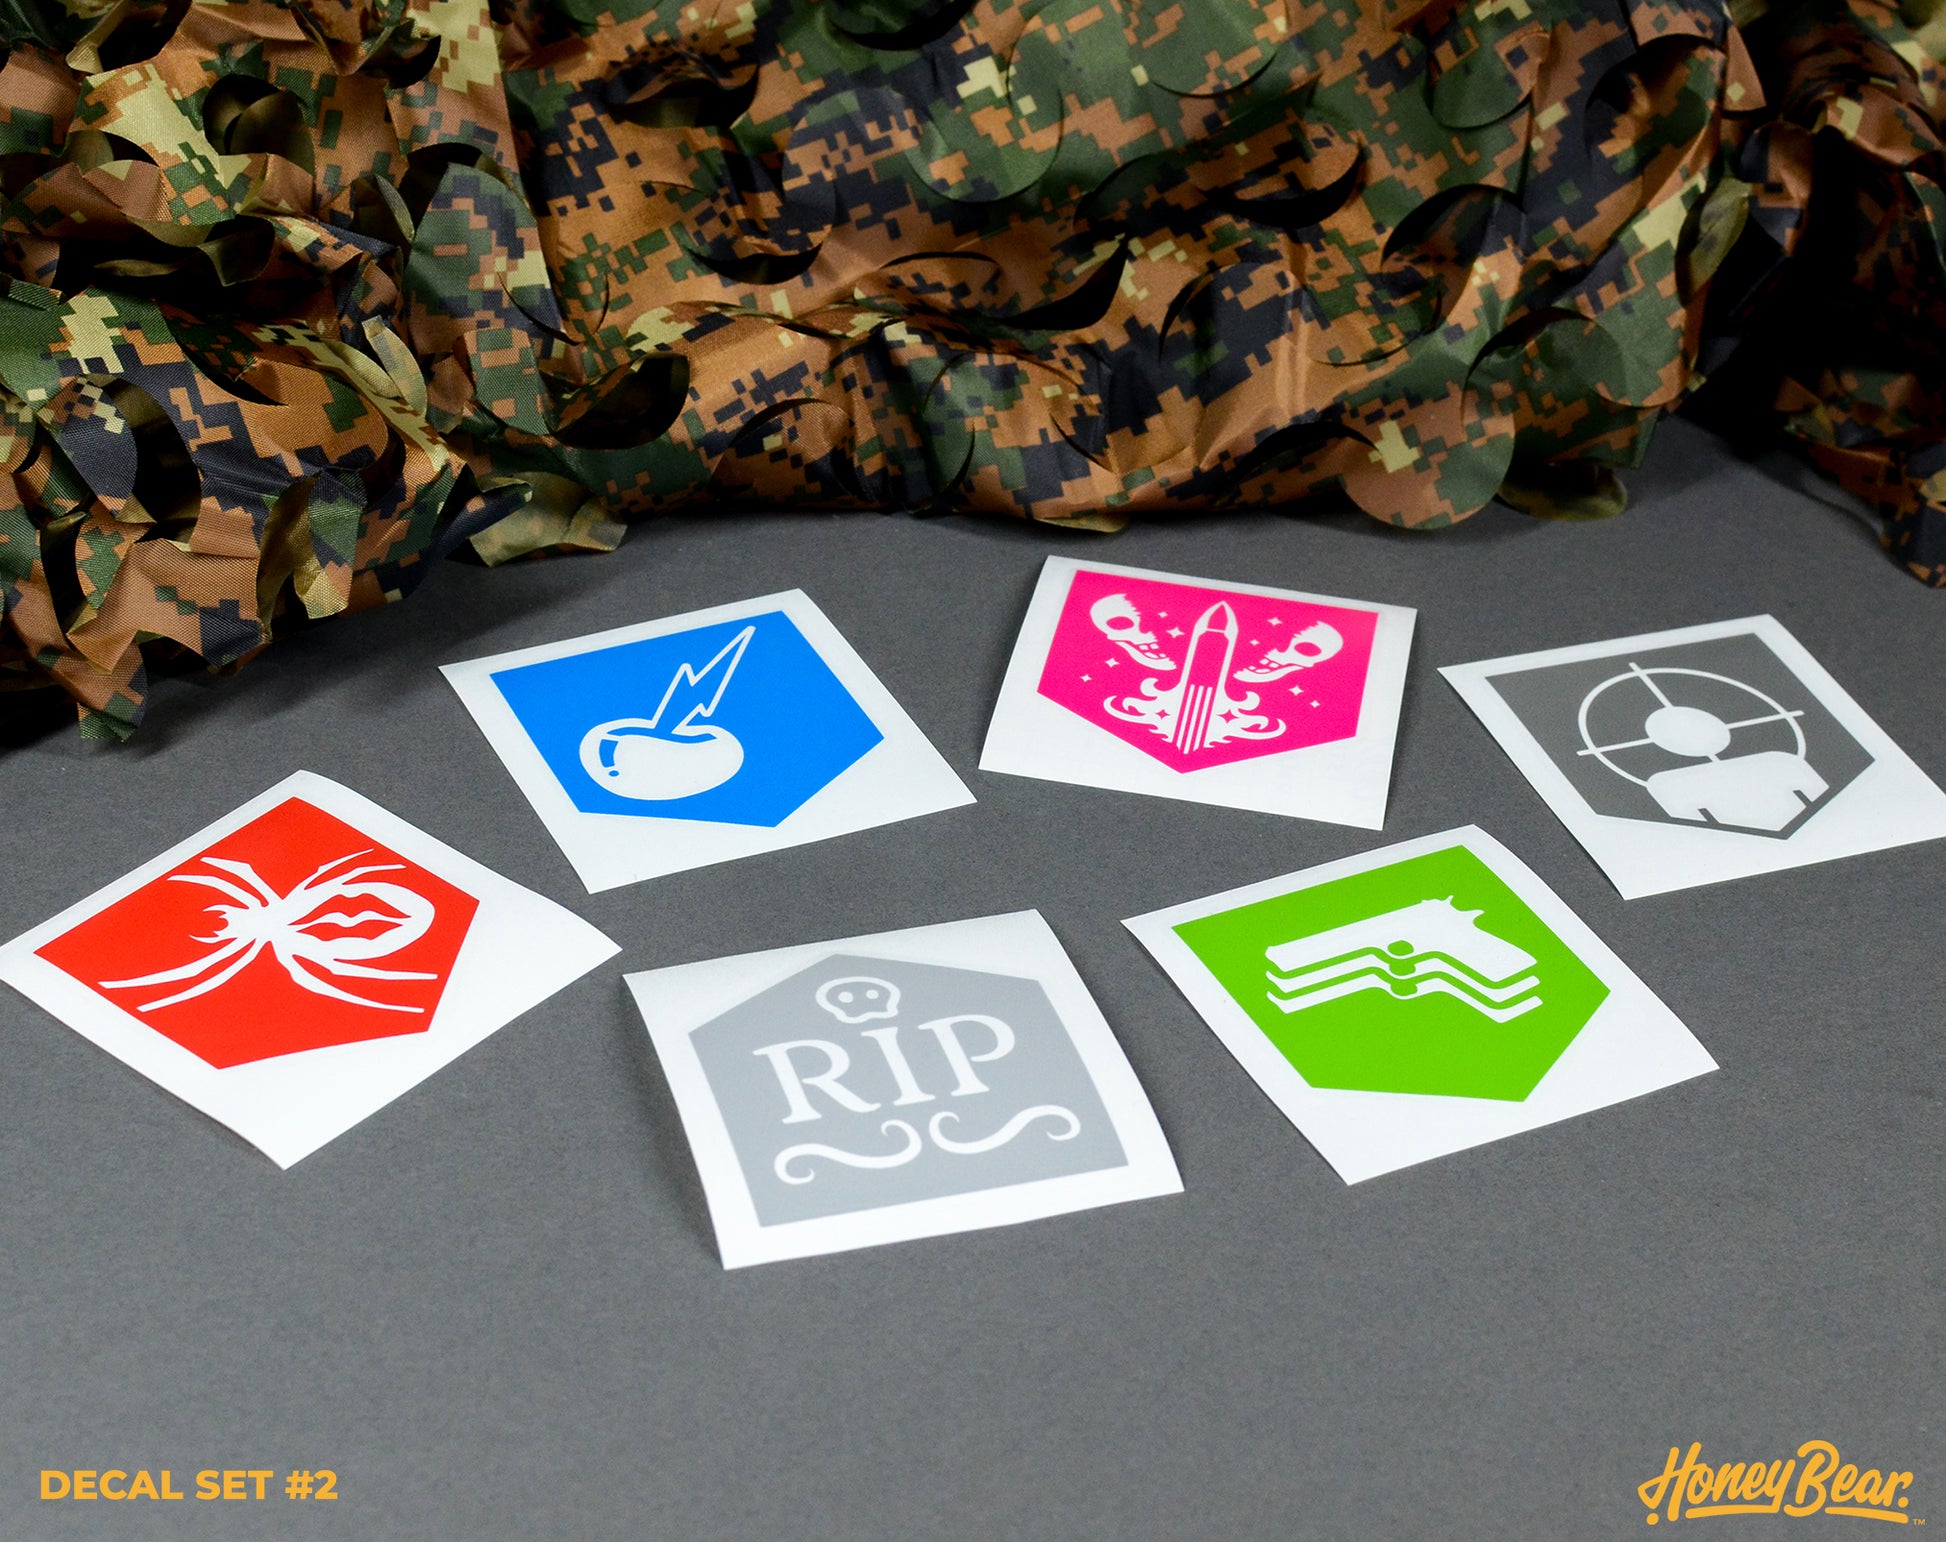 Durable and colorful Zombies Perk themed decals displayed, ideal for personalizing vehicles.